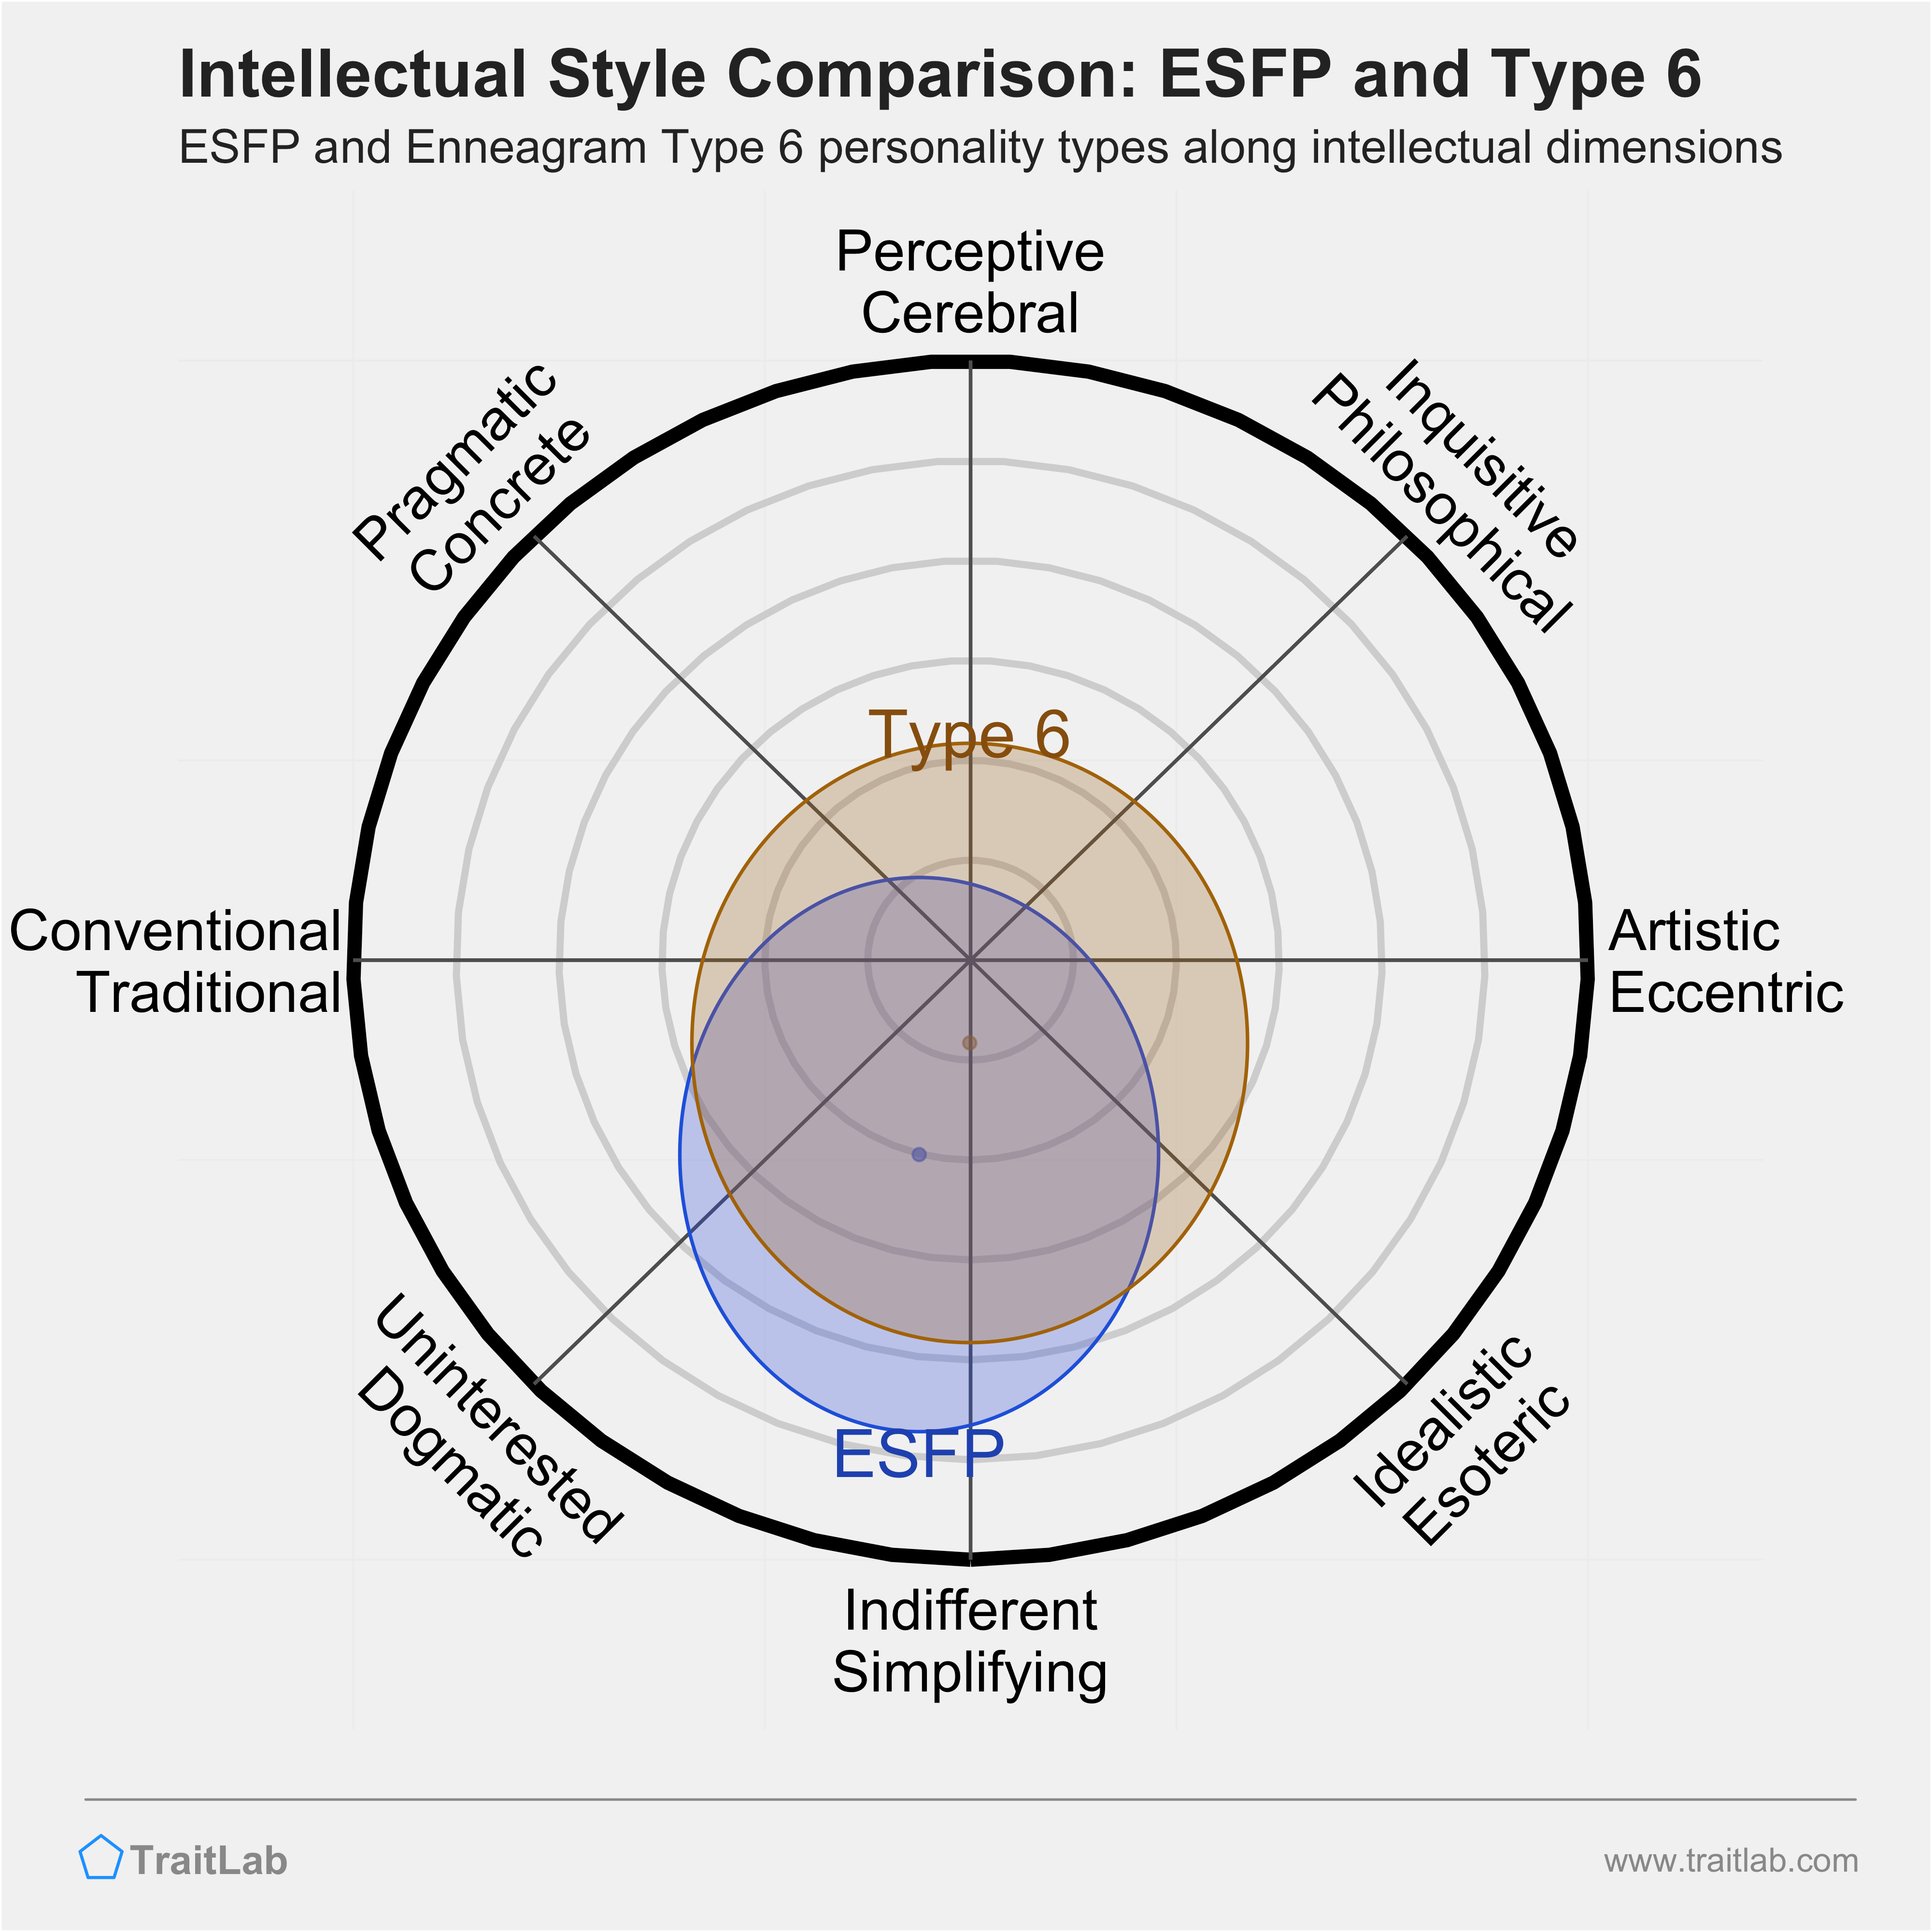 ESFP and Type 6 comparison across intellectual dimensions